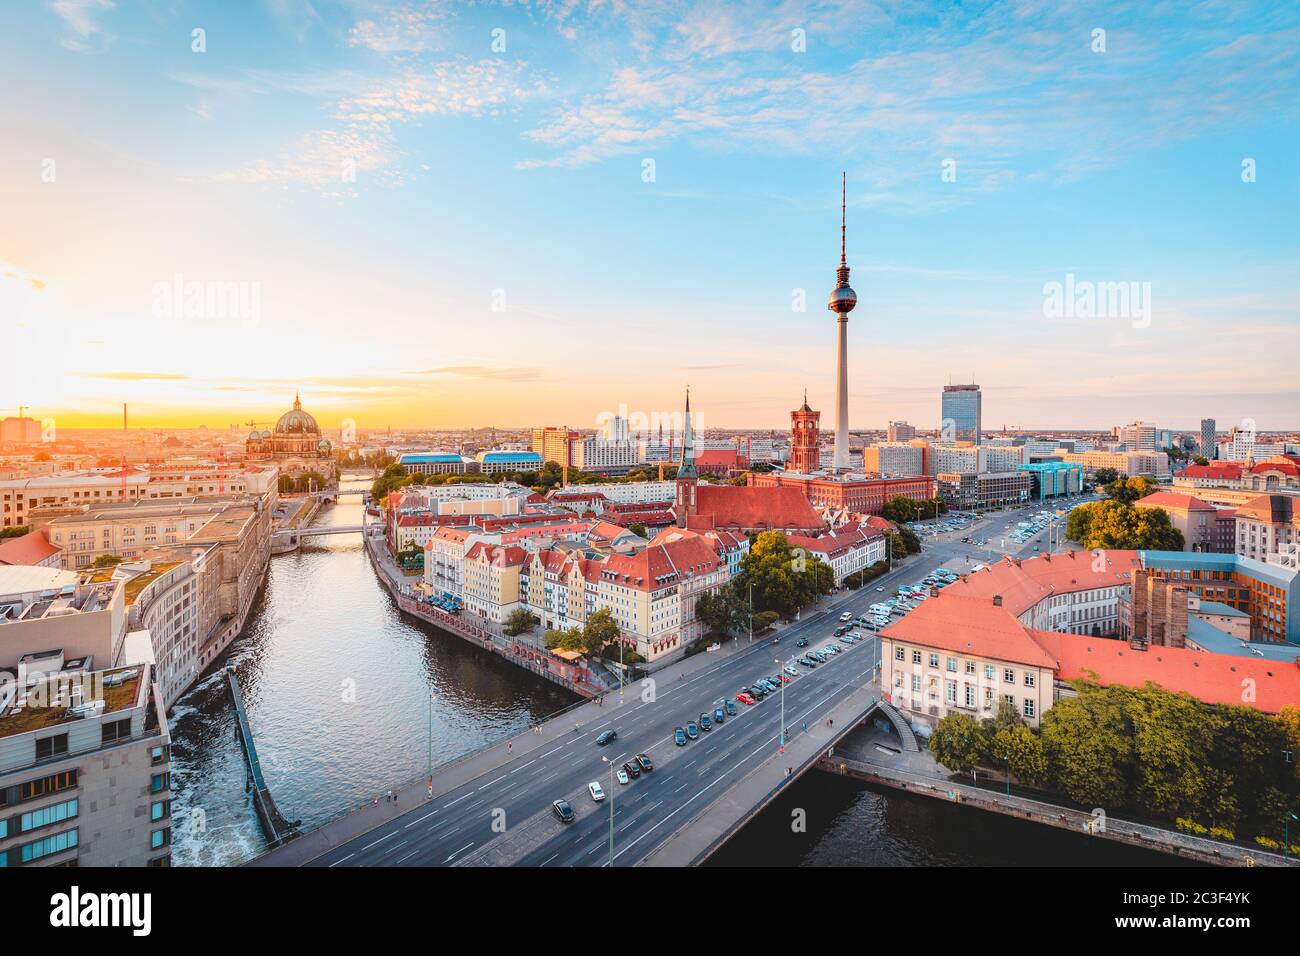 Classic view of Berlin skyline with famous TV tower and Spree in beautiful golden evening light at sunset, central Berlin Mitte, Germany Stock Photo